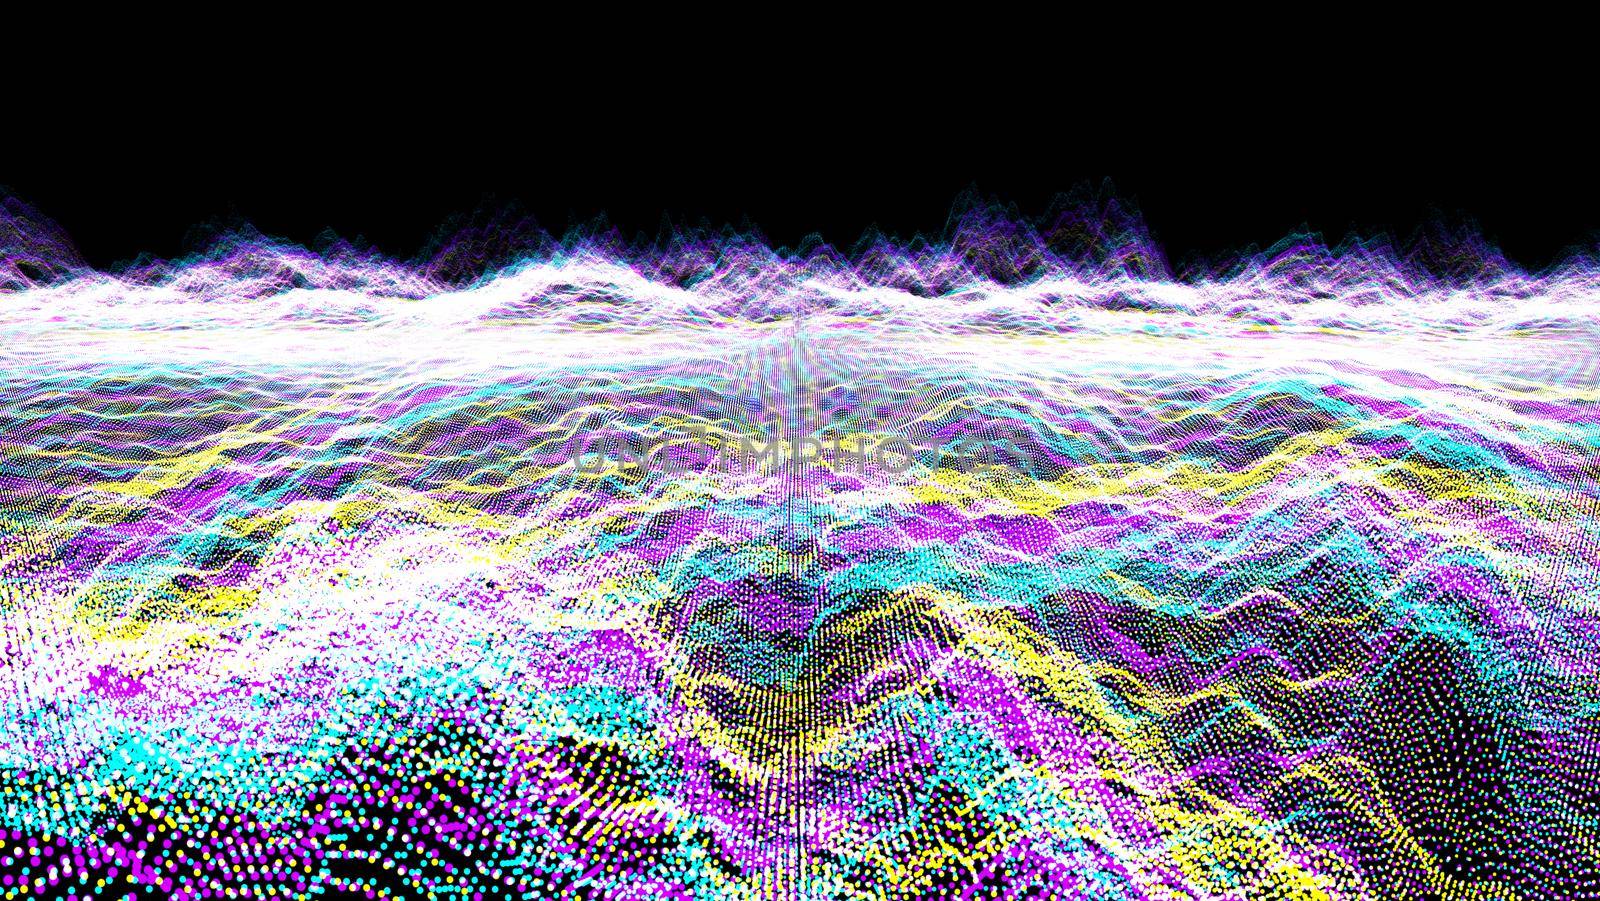 Futuristic abstract blur purple blue yellow waveform ball oscillation, visualization wave technology digital surface with particles stars